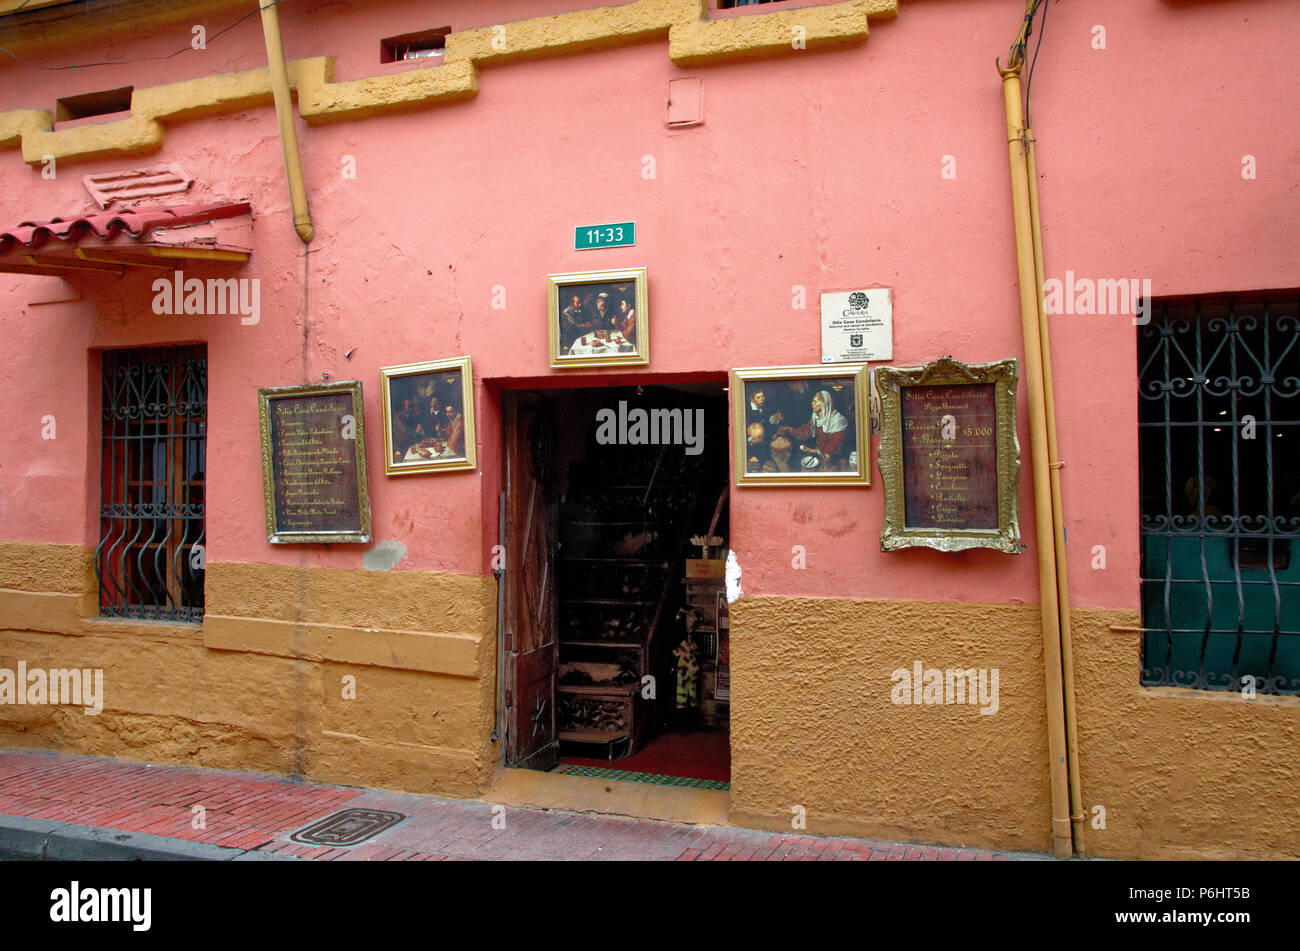 Entrance to a restaurant Canitina in La Candelaria, Bogota, Colombia Stock Photo